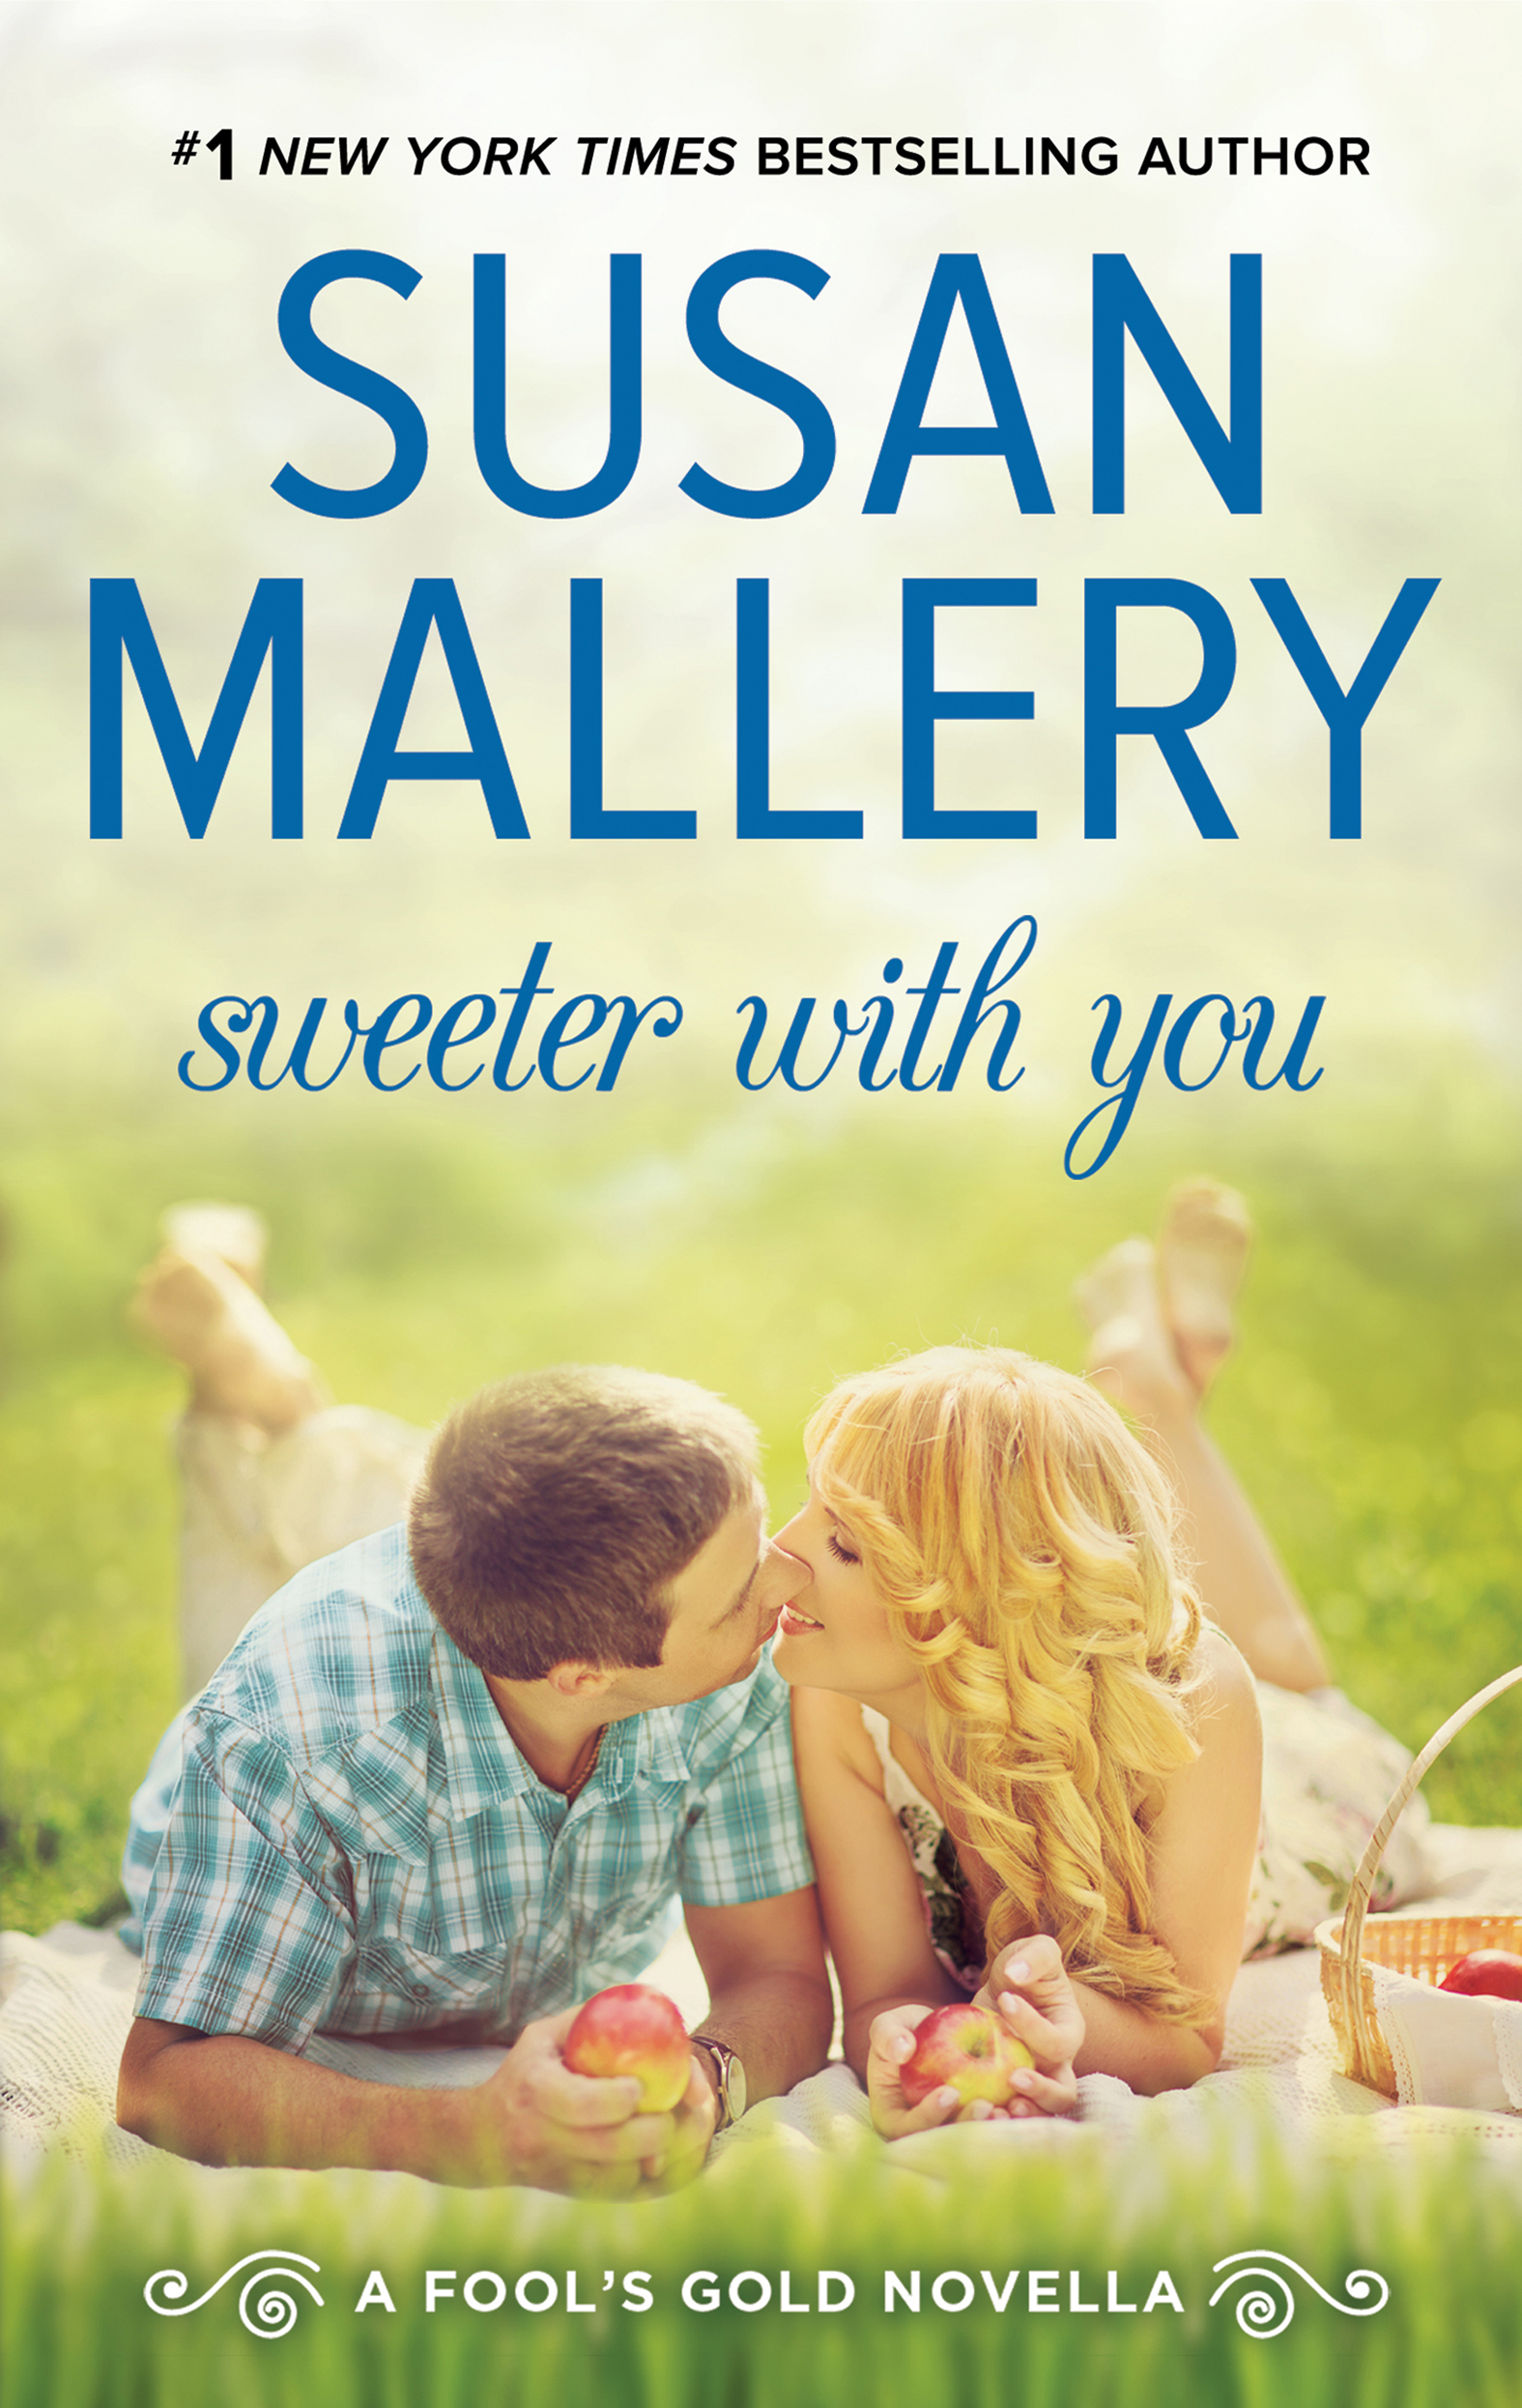 Sweeter With You (2016) by Susan Mallery